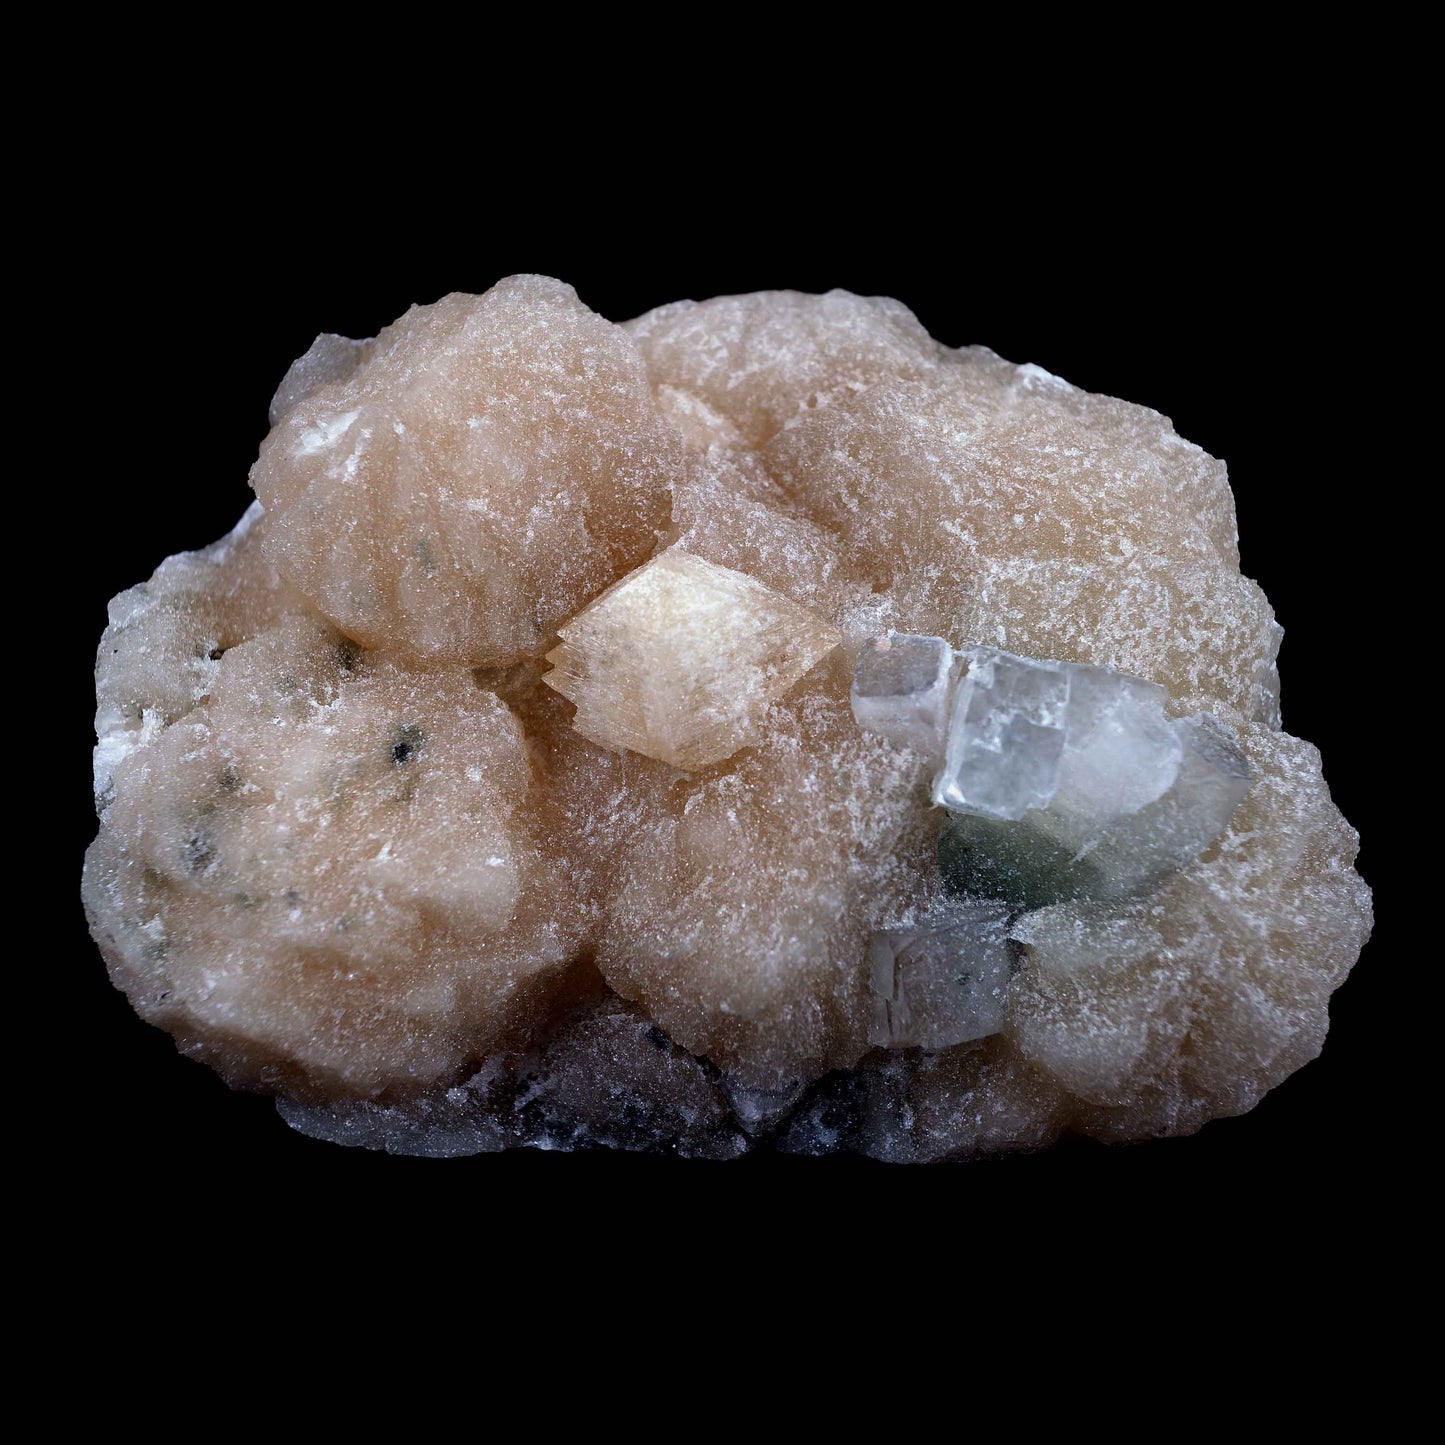 Powellite Fluorescent, Apophyllite Fuse with Stilbite Natural Mineral …  https://www.superbminerals.us/products/powellite-apophyllite-fuse-with-stilbite-natural-mineral-specimen-b-4016  Features:A well-formed pyramidal crystal of Powellite displays multiple terminations with gemmy to translucent tan-beige areas and great luster on a very well developed intergrown pink crystal matrix of Stilbite. The powellite crystals fluoresce a bright yellow, under UV light. A fine Powellite specimen from the Nashik